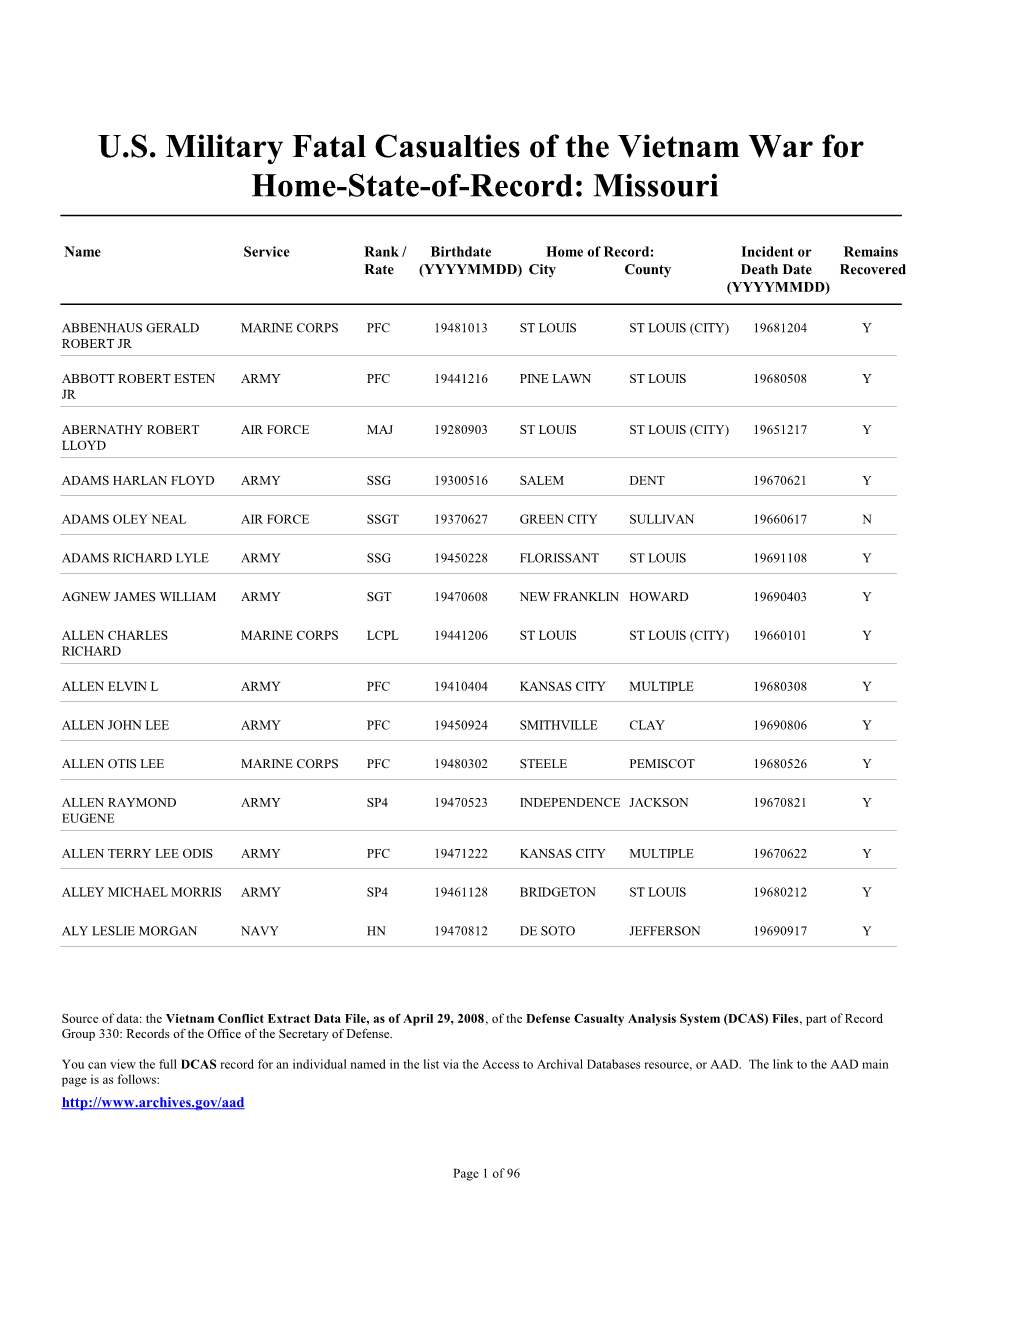 U.S. Military Fatal Casualties of the Vietnam War for Home-State-Of-Record: Missouri